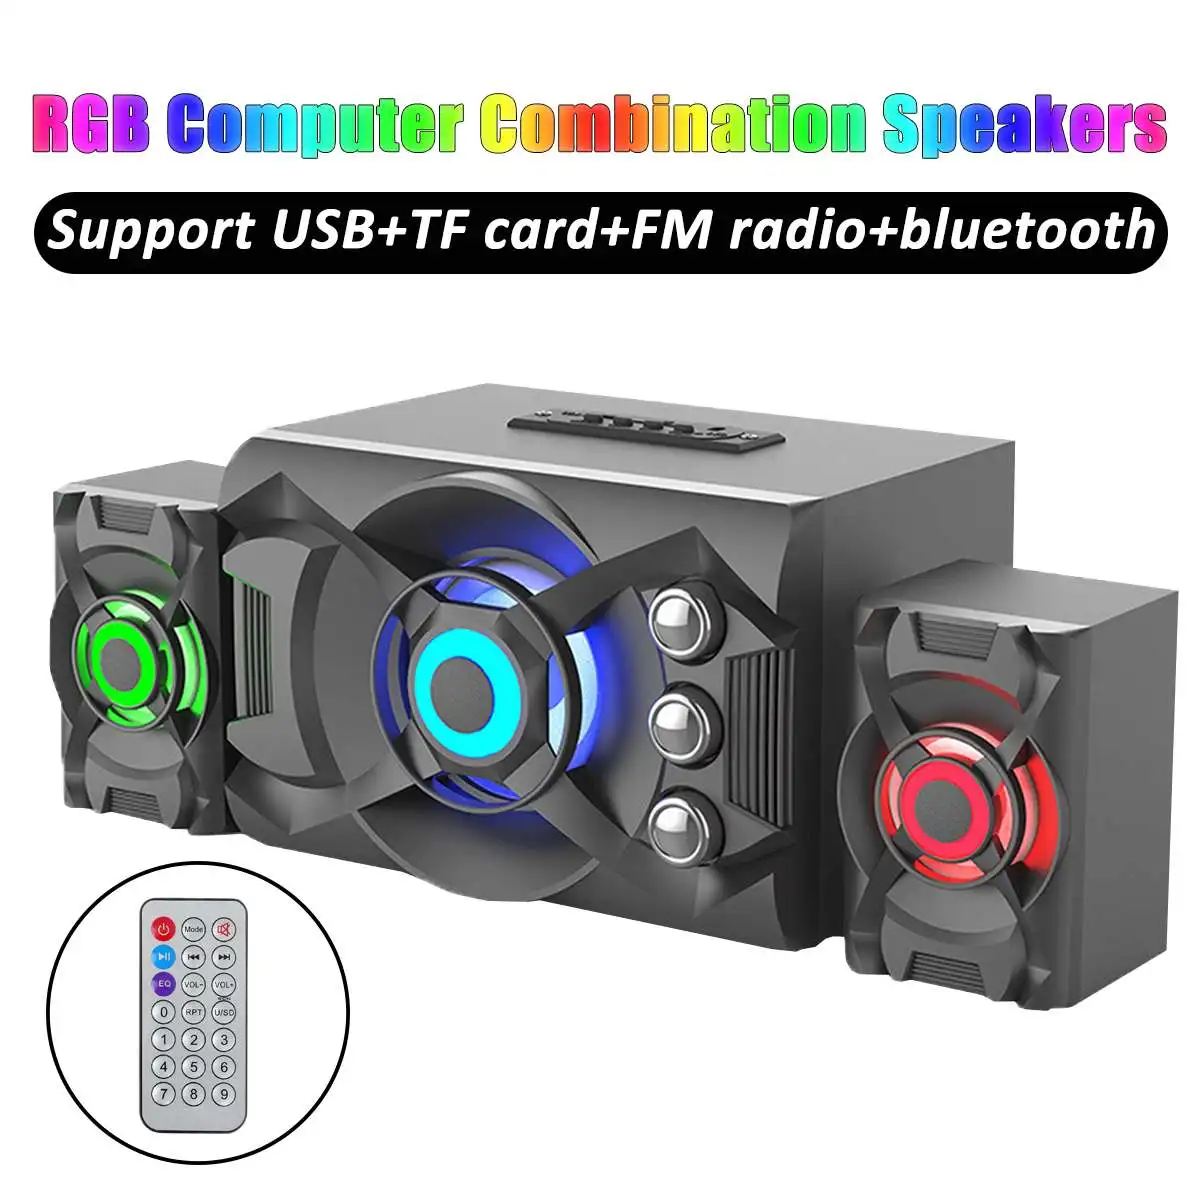 K-580U 3 in1 bluetooth RGB Computer Combination Speakers Multimedia Speaker Stereo Subwoofer  USB SD Card FM Radio for PC Laptop